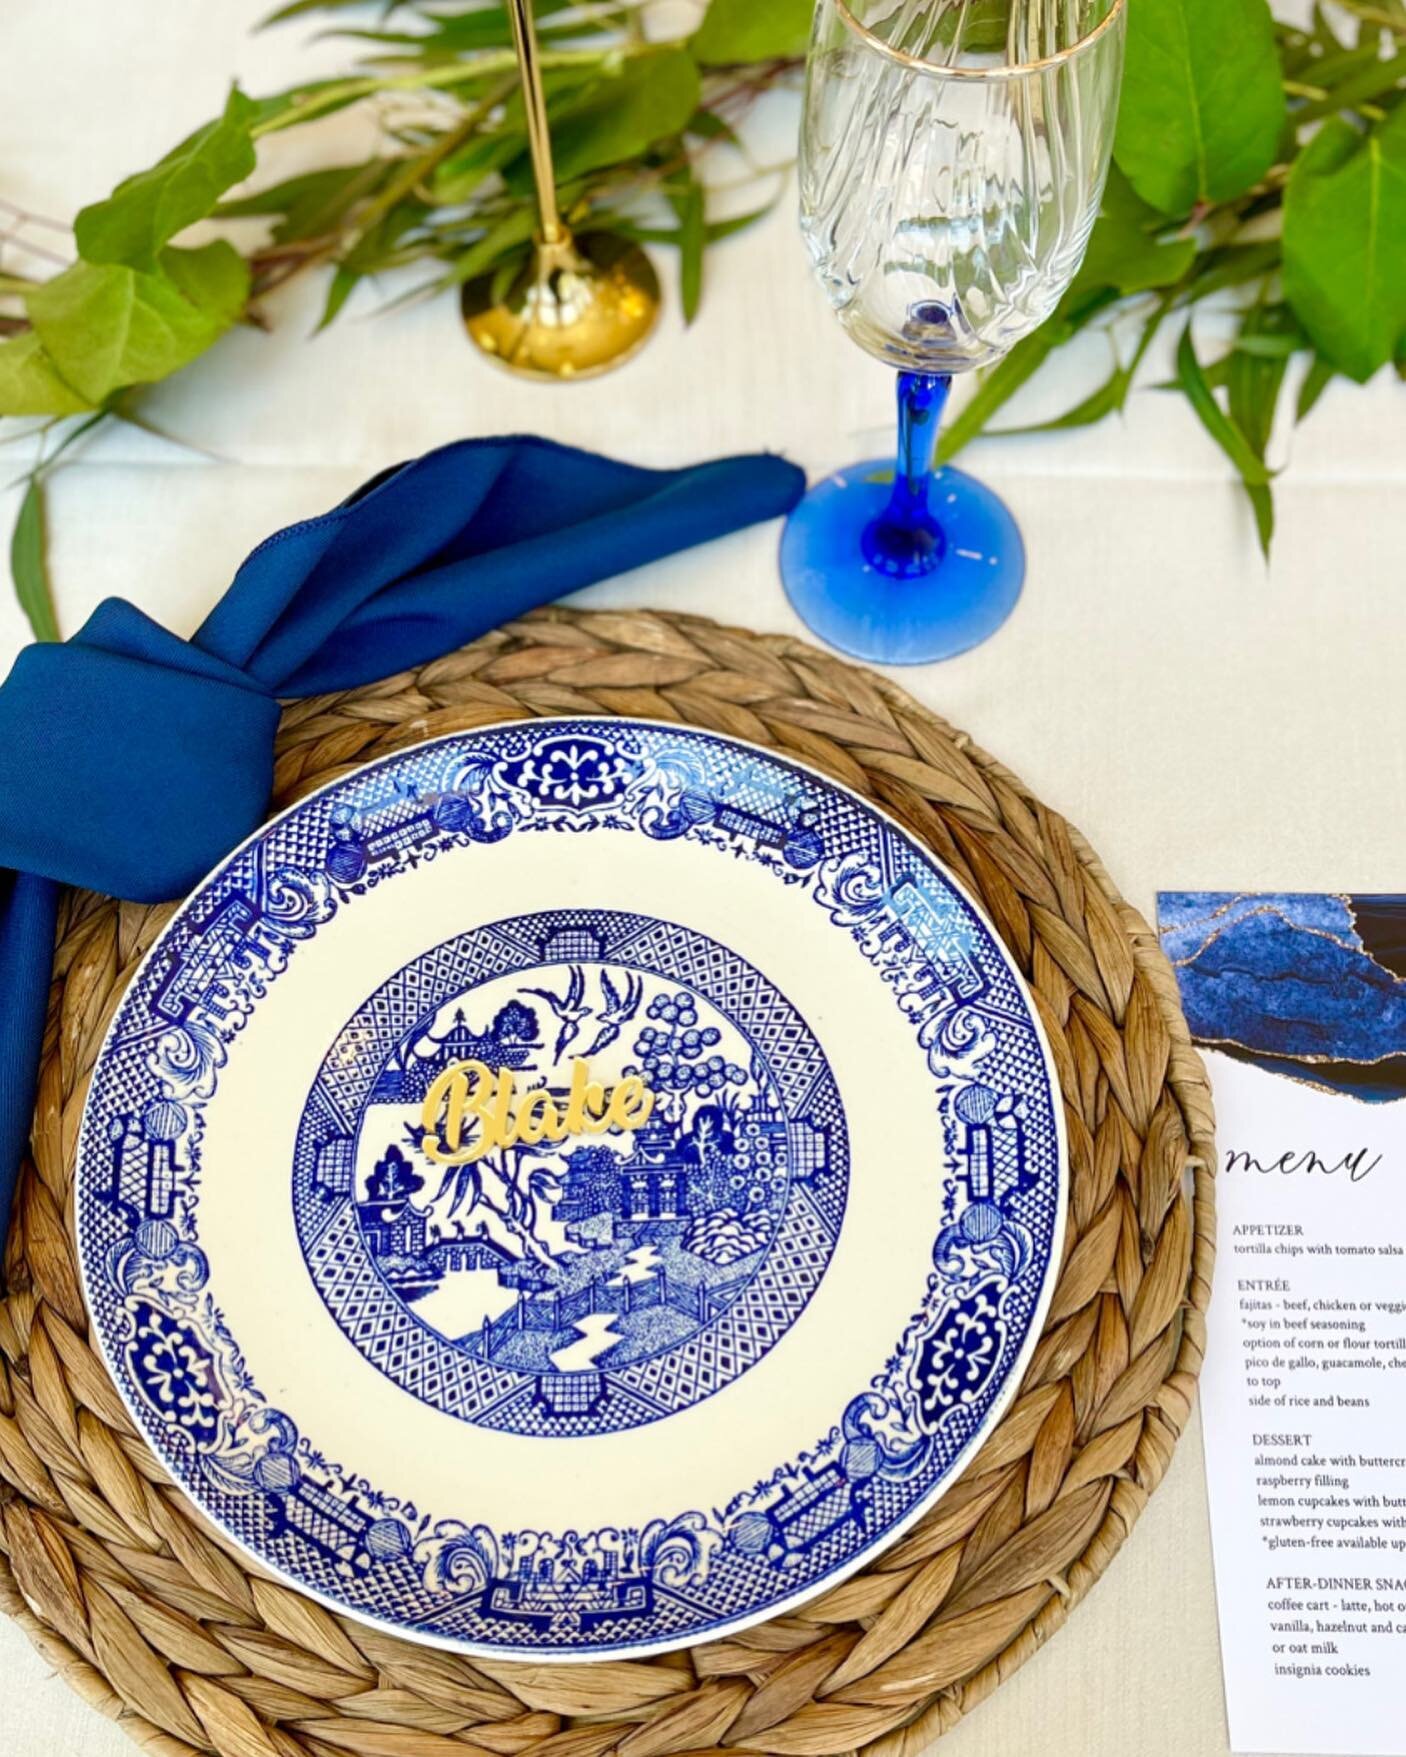 Blue willow&hellip;.
My favorite place setting!